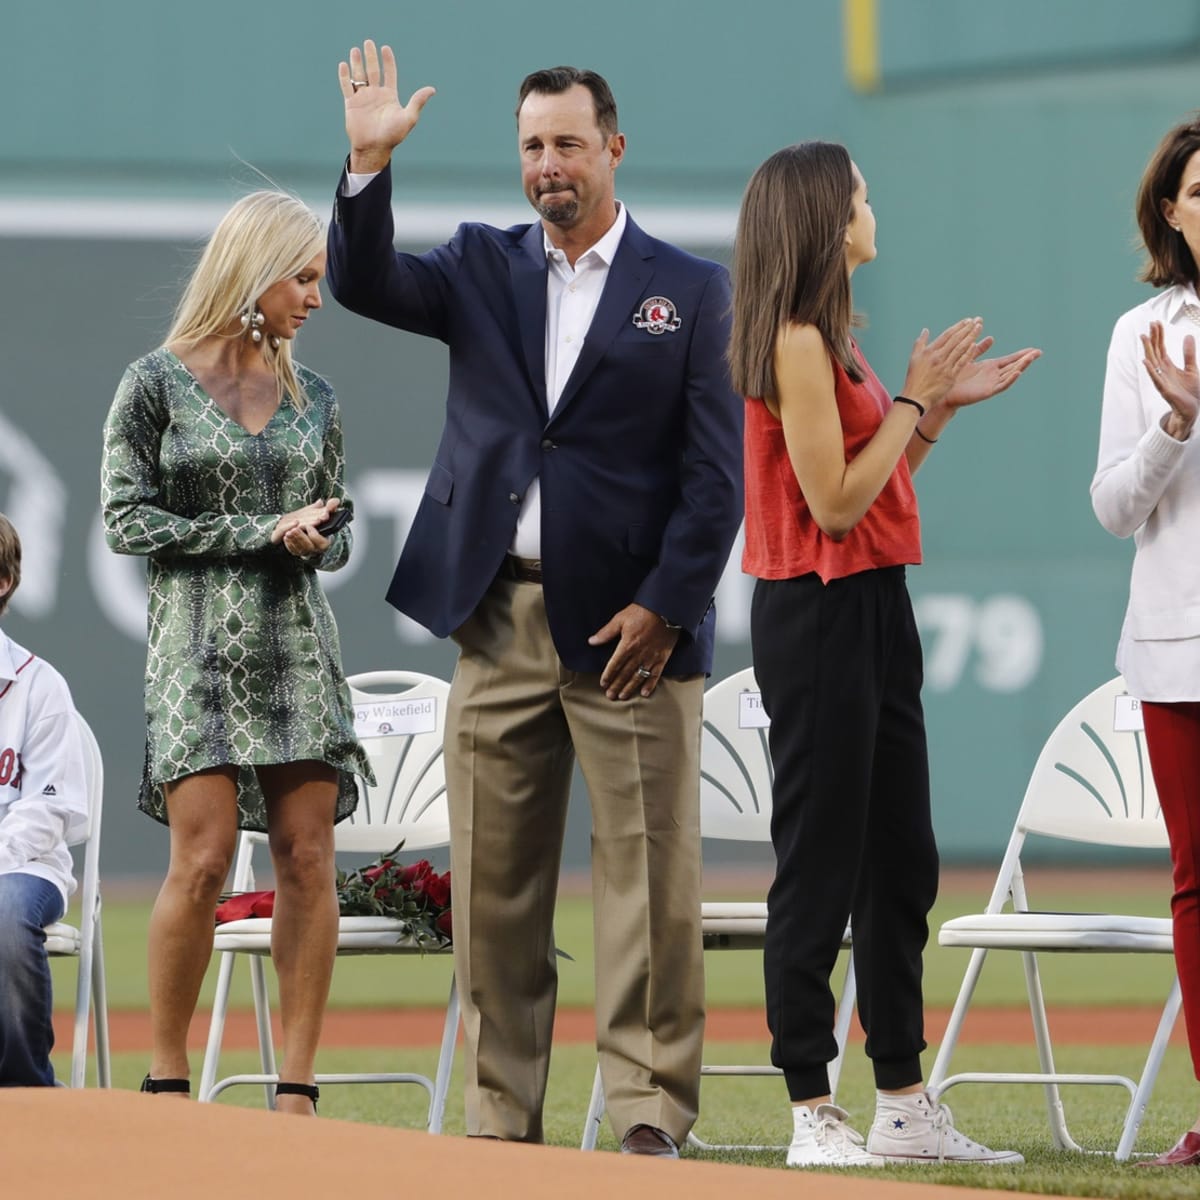 Red Sox icon Tim Wakefield dies at 57